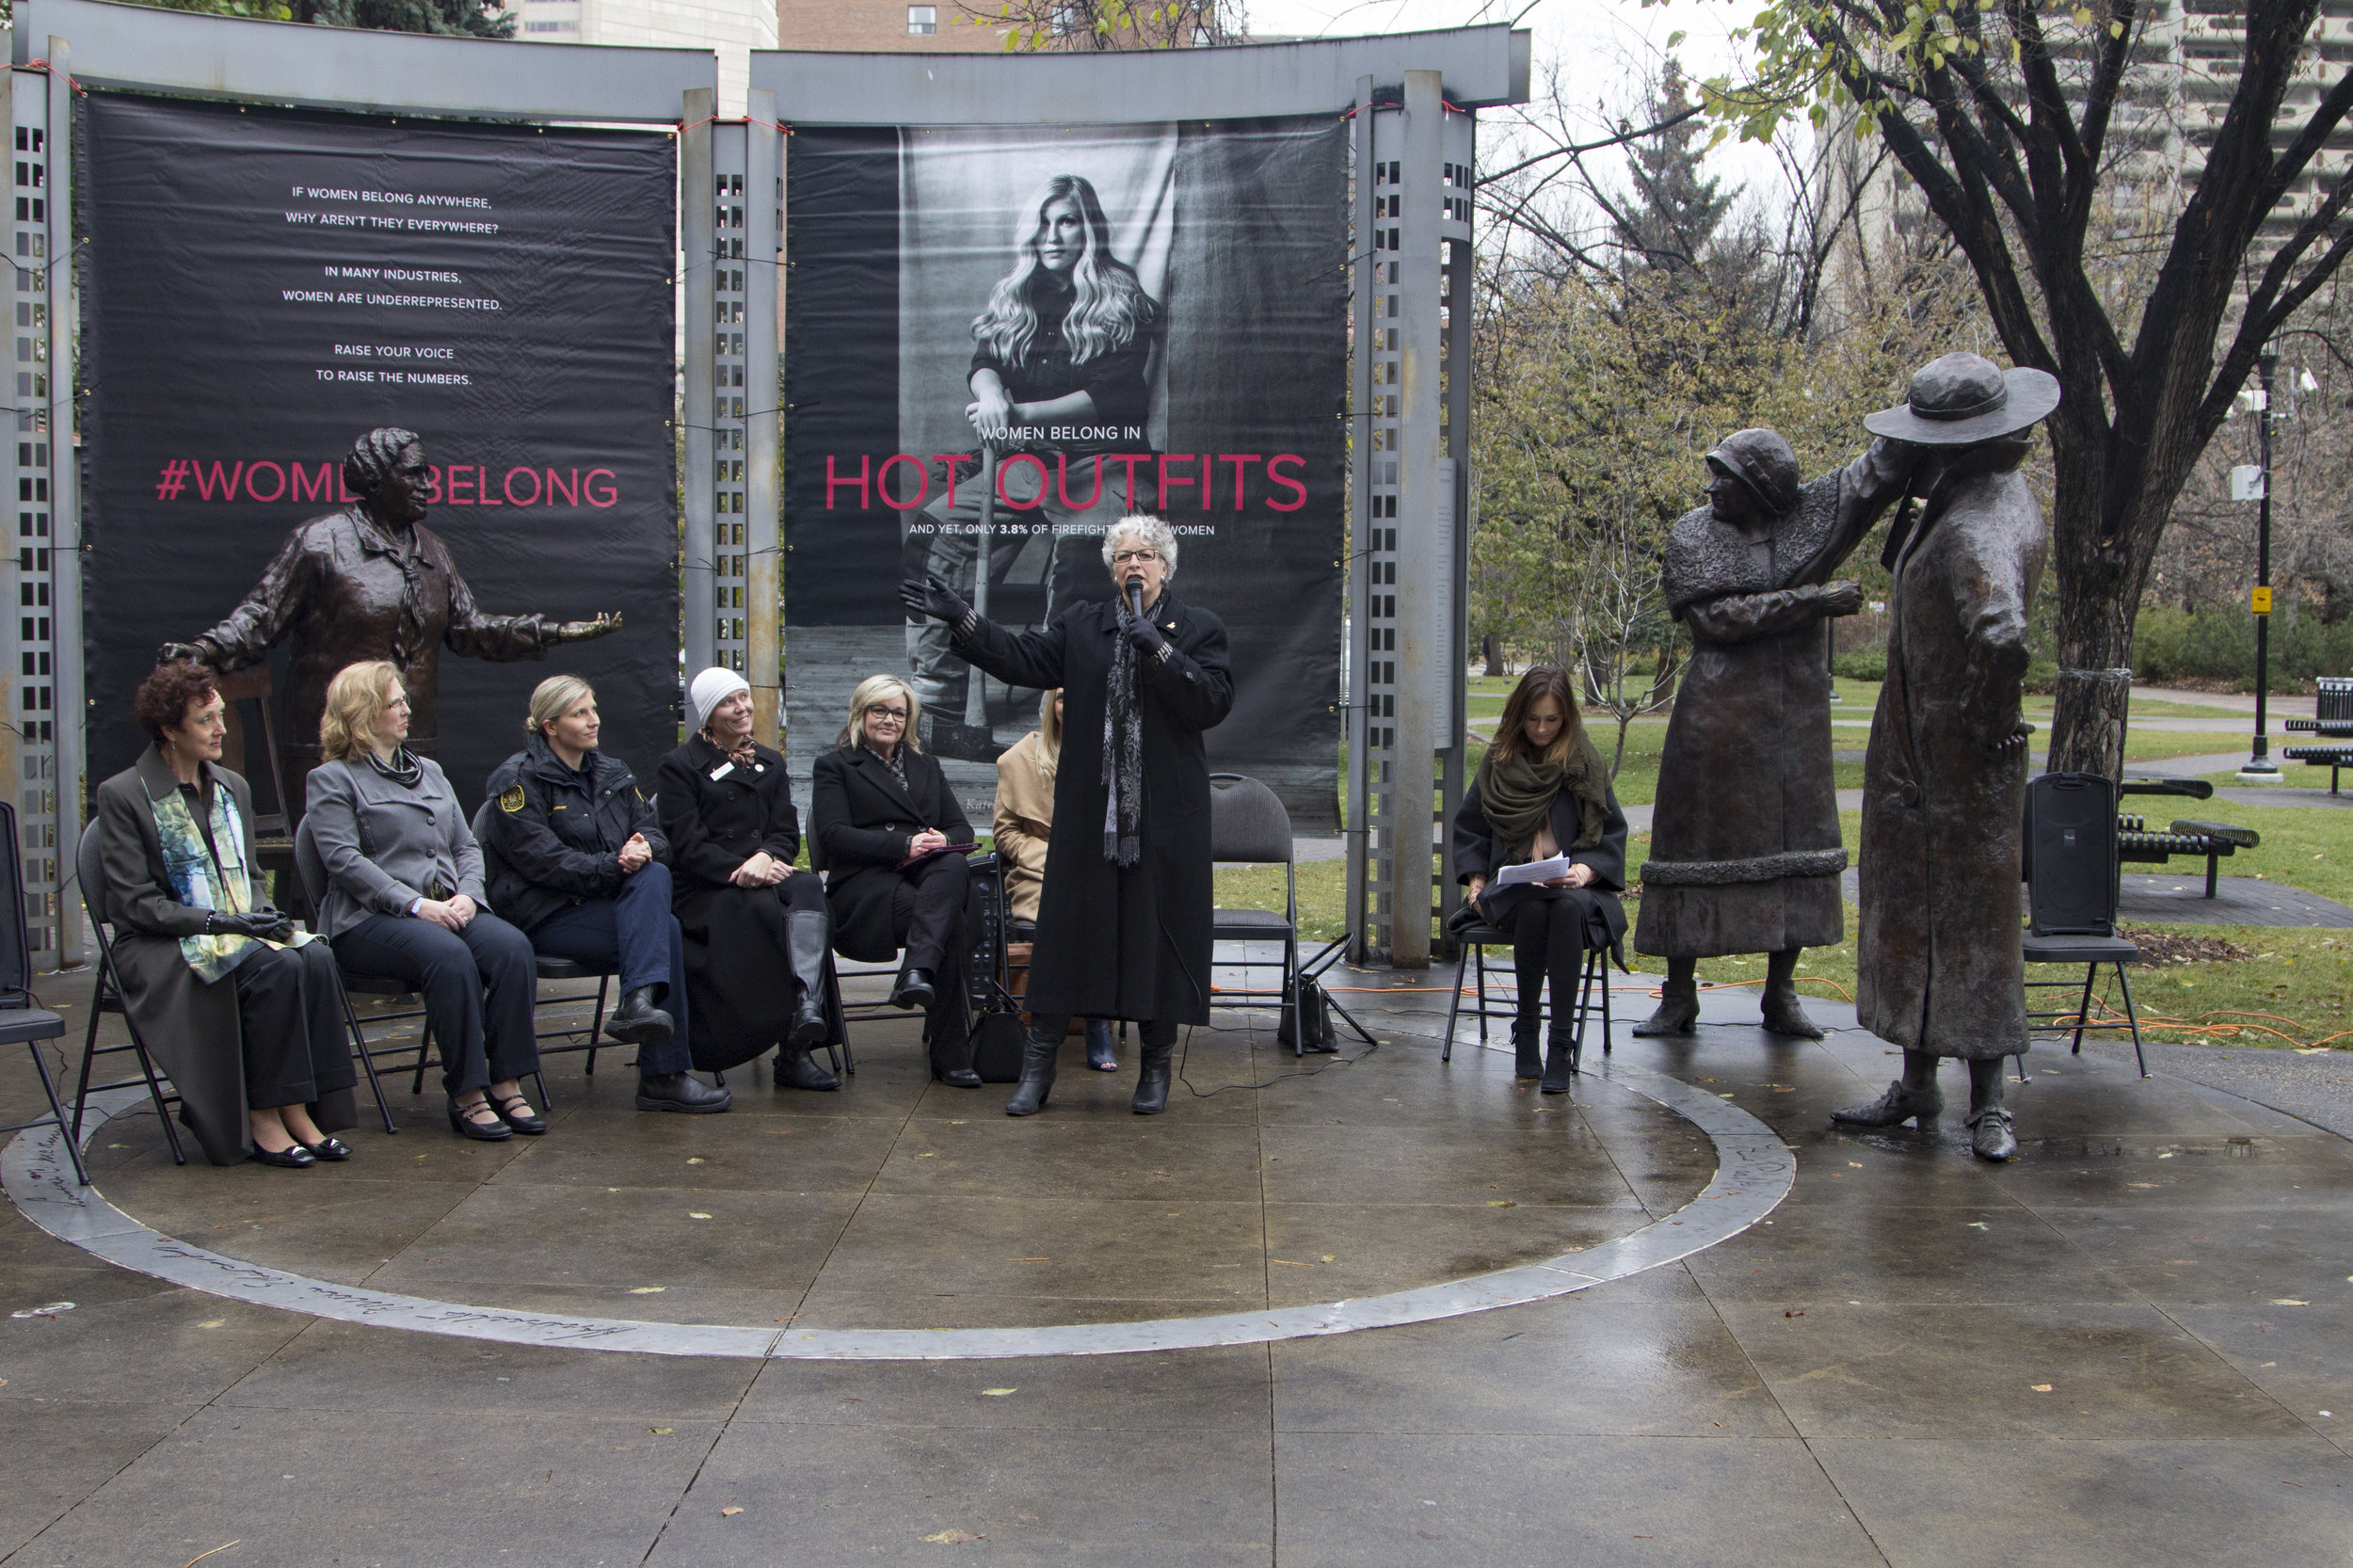  Frances Wright, founder of the Famous 5 Foundation addresses the group at the Persons Day event at Olympic Plaza in Calgary on Oct 18, 2016 